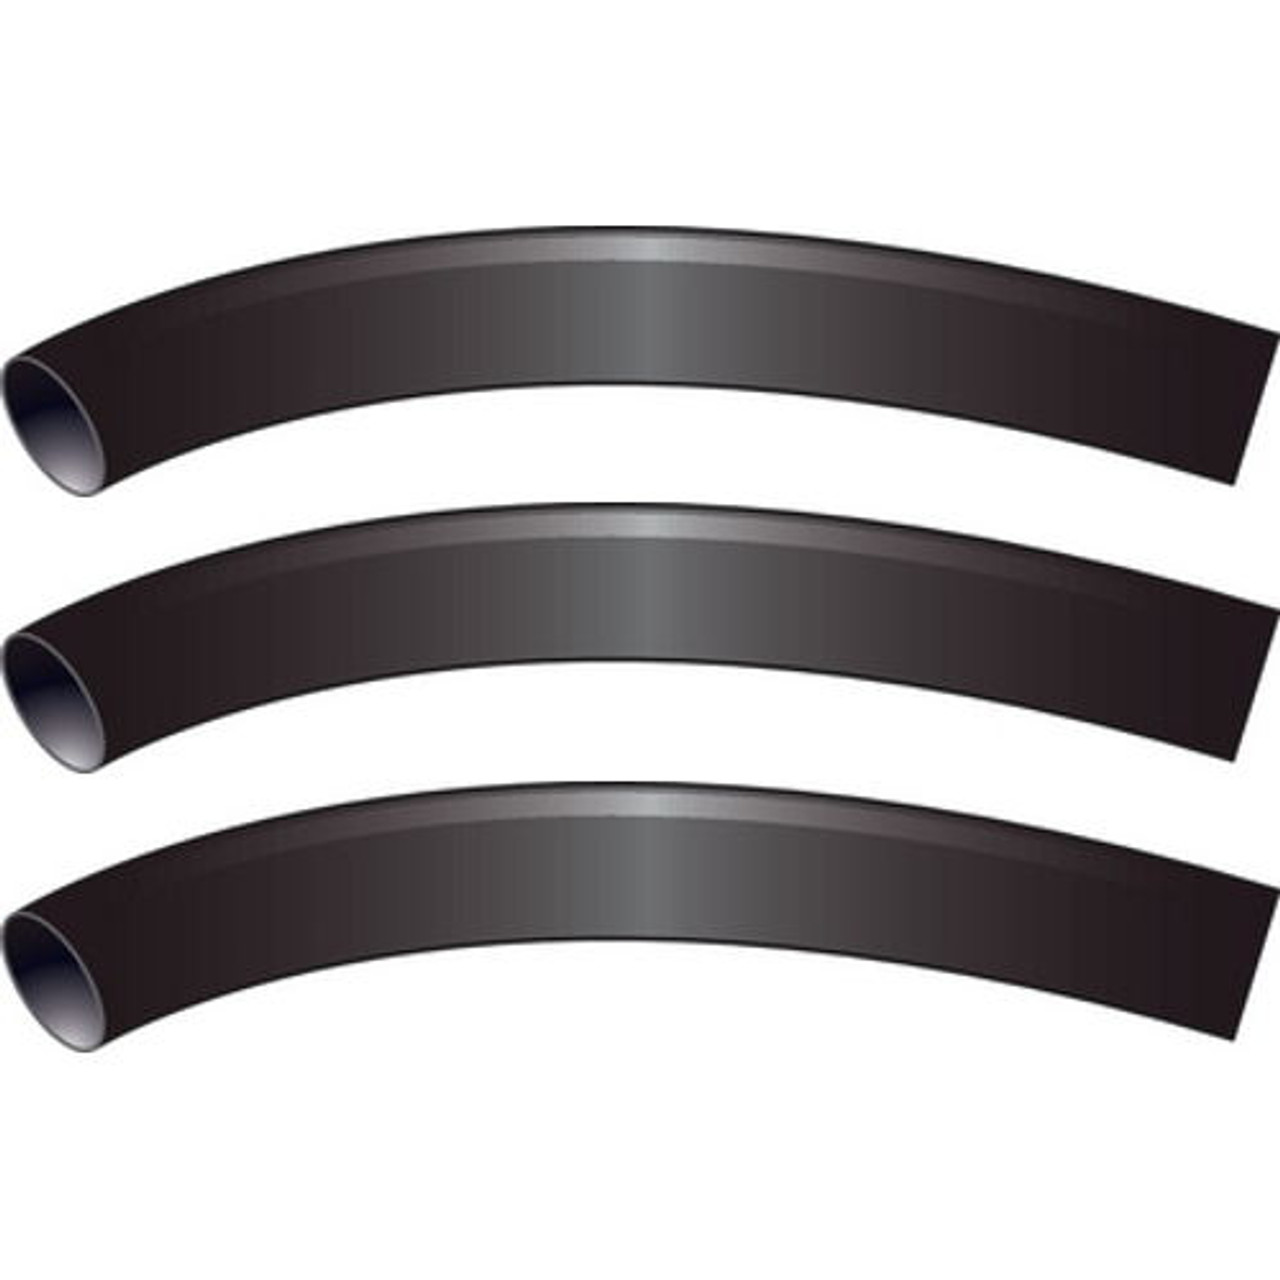 3 Pack of Black 3/16 Inch x 3 Inch 3:1 Heat Shrink Tubing with Sealant for Boats